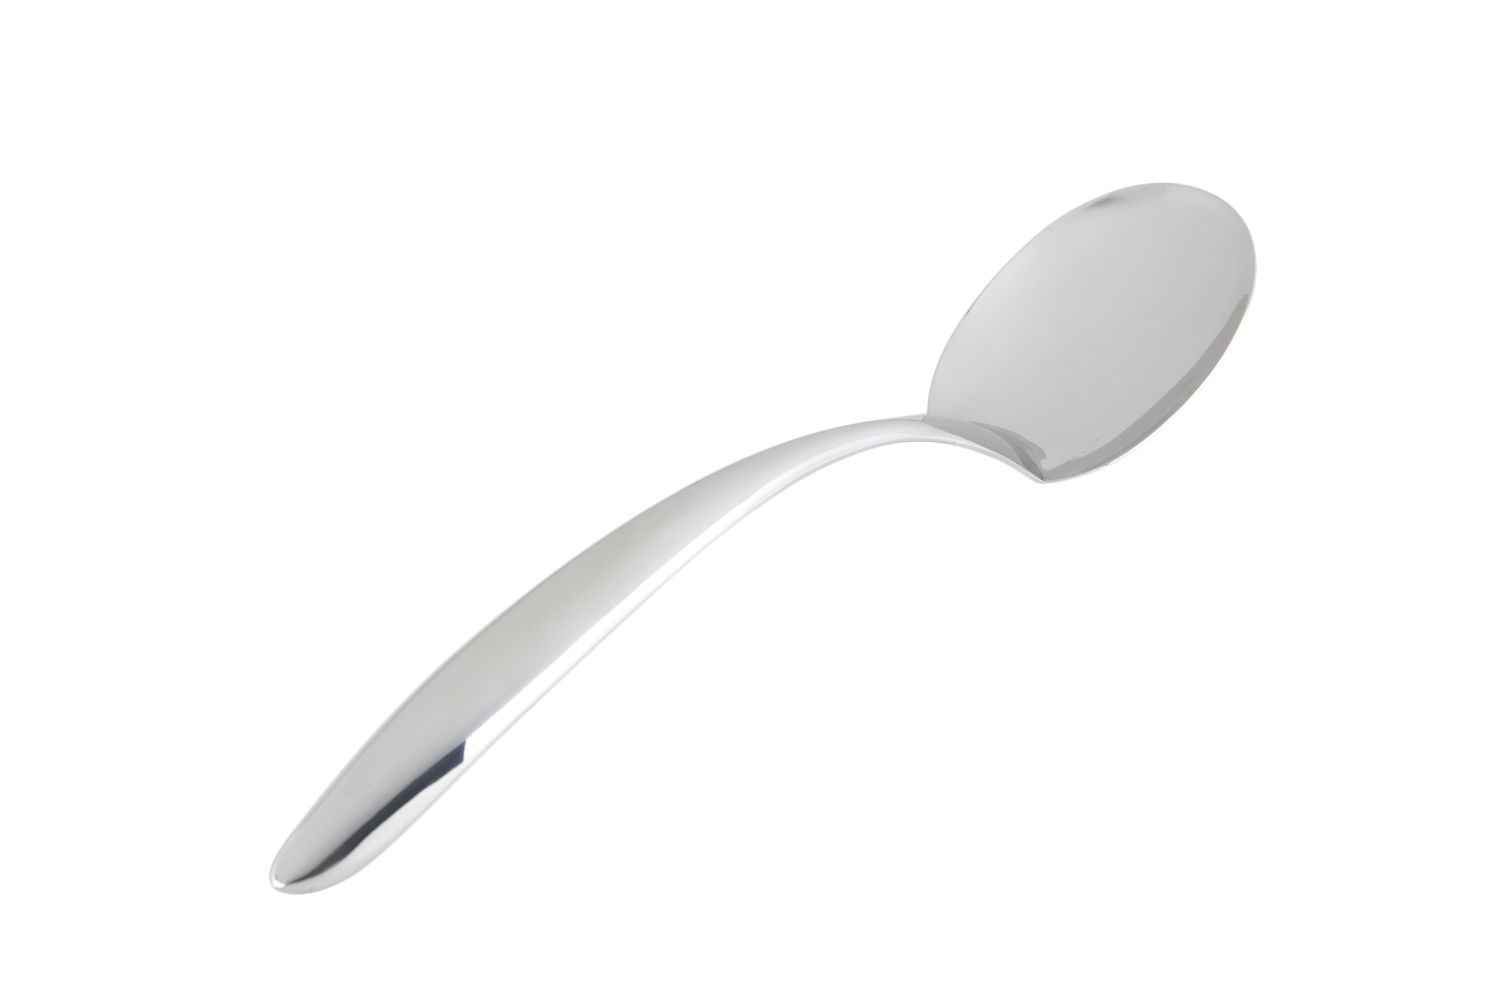 Bon Chef 9457 EZ Use Banquet Serving Solid Spoon with Hollow Cool Handle, 13 1/2"